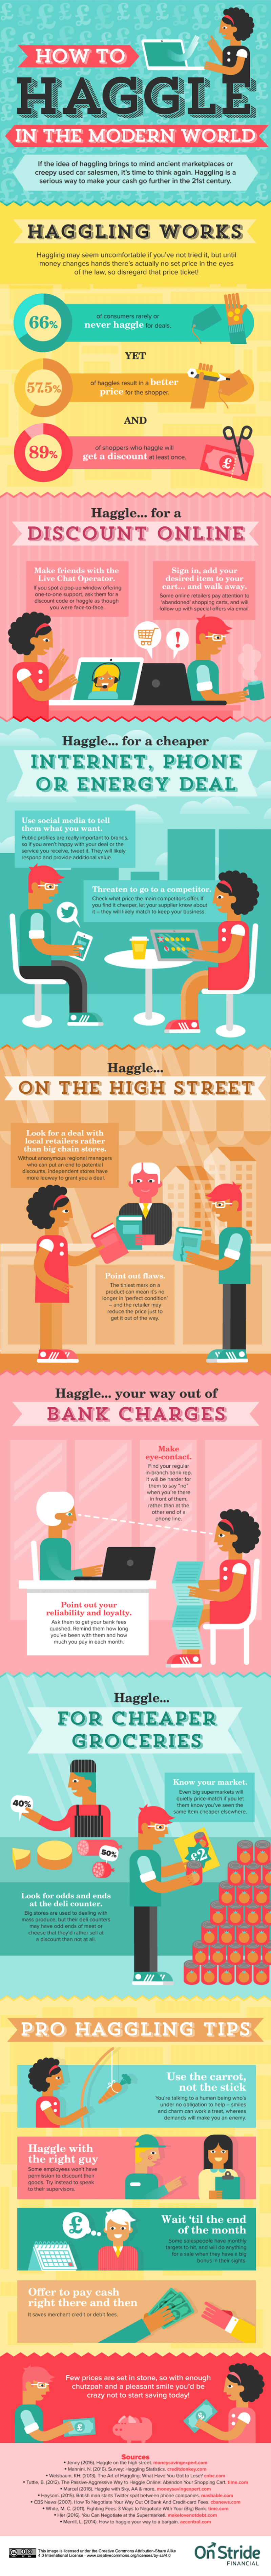 How To Successfully Haggle Online And In Person [Infographic]